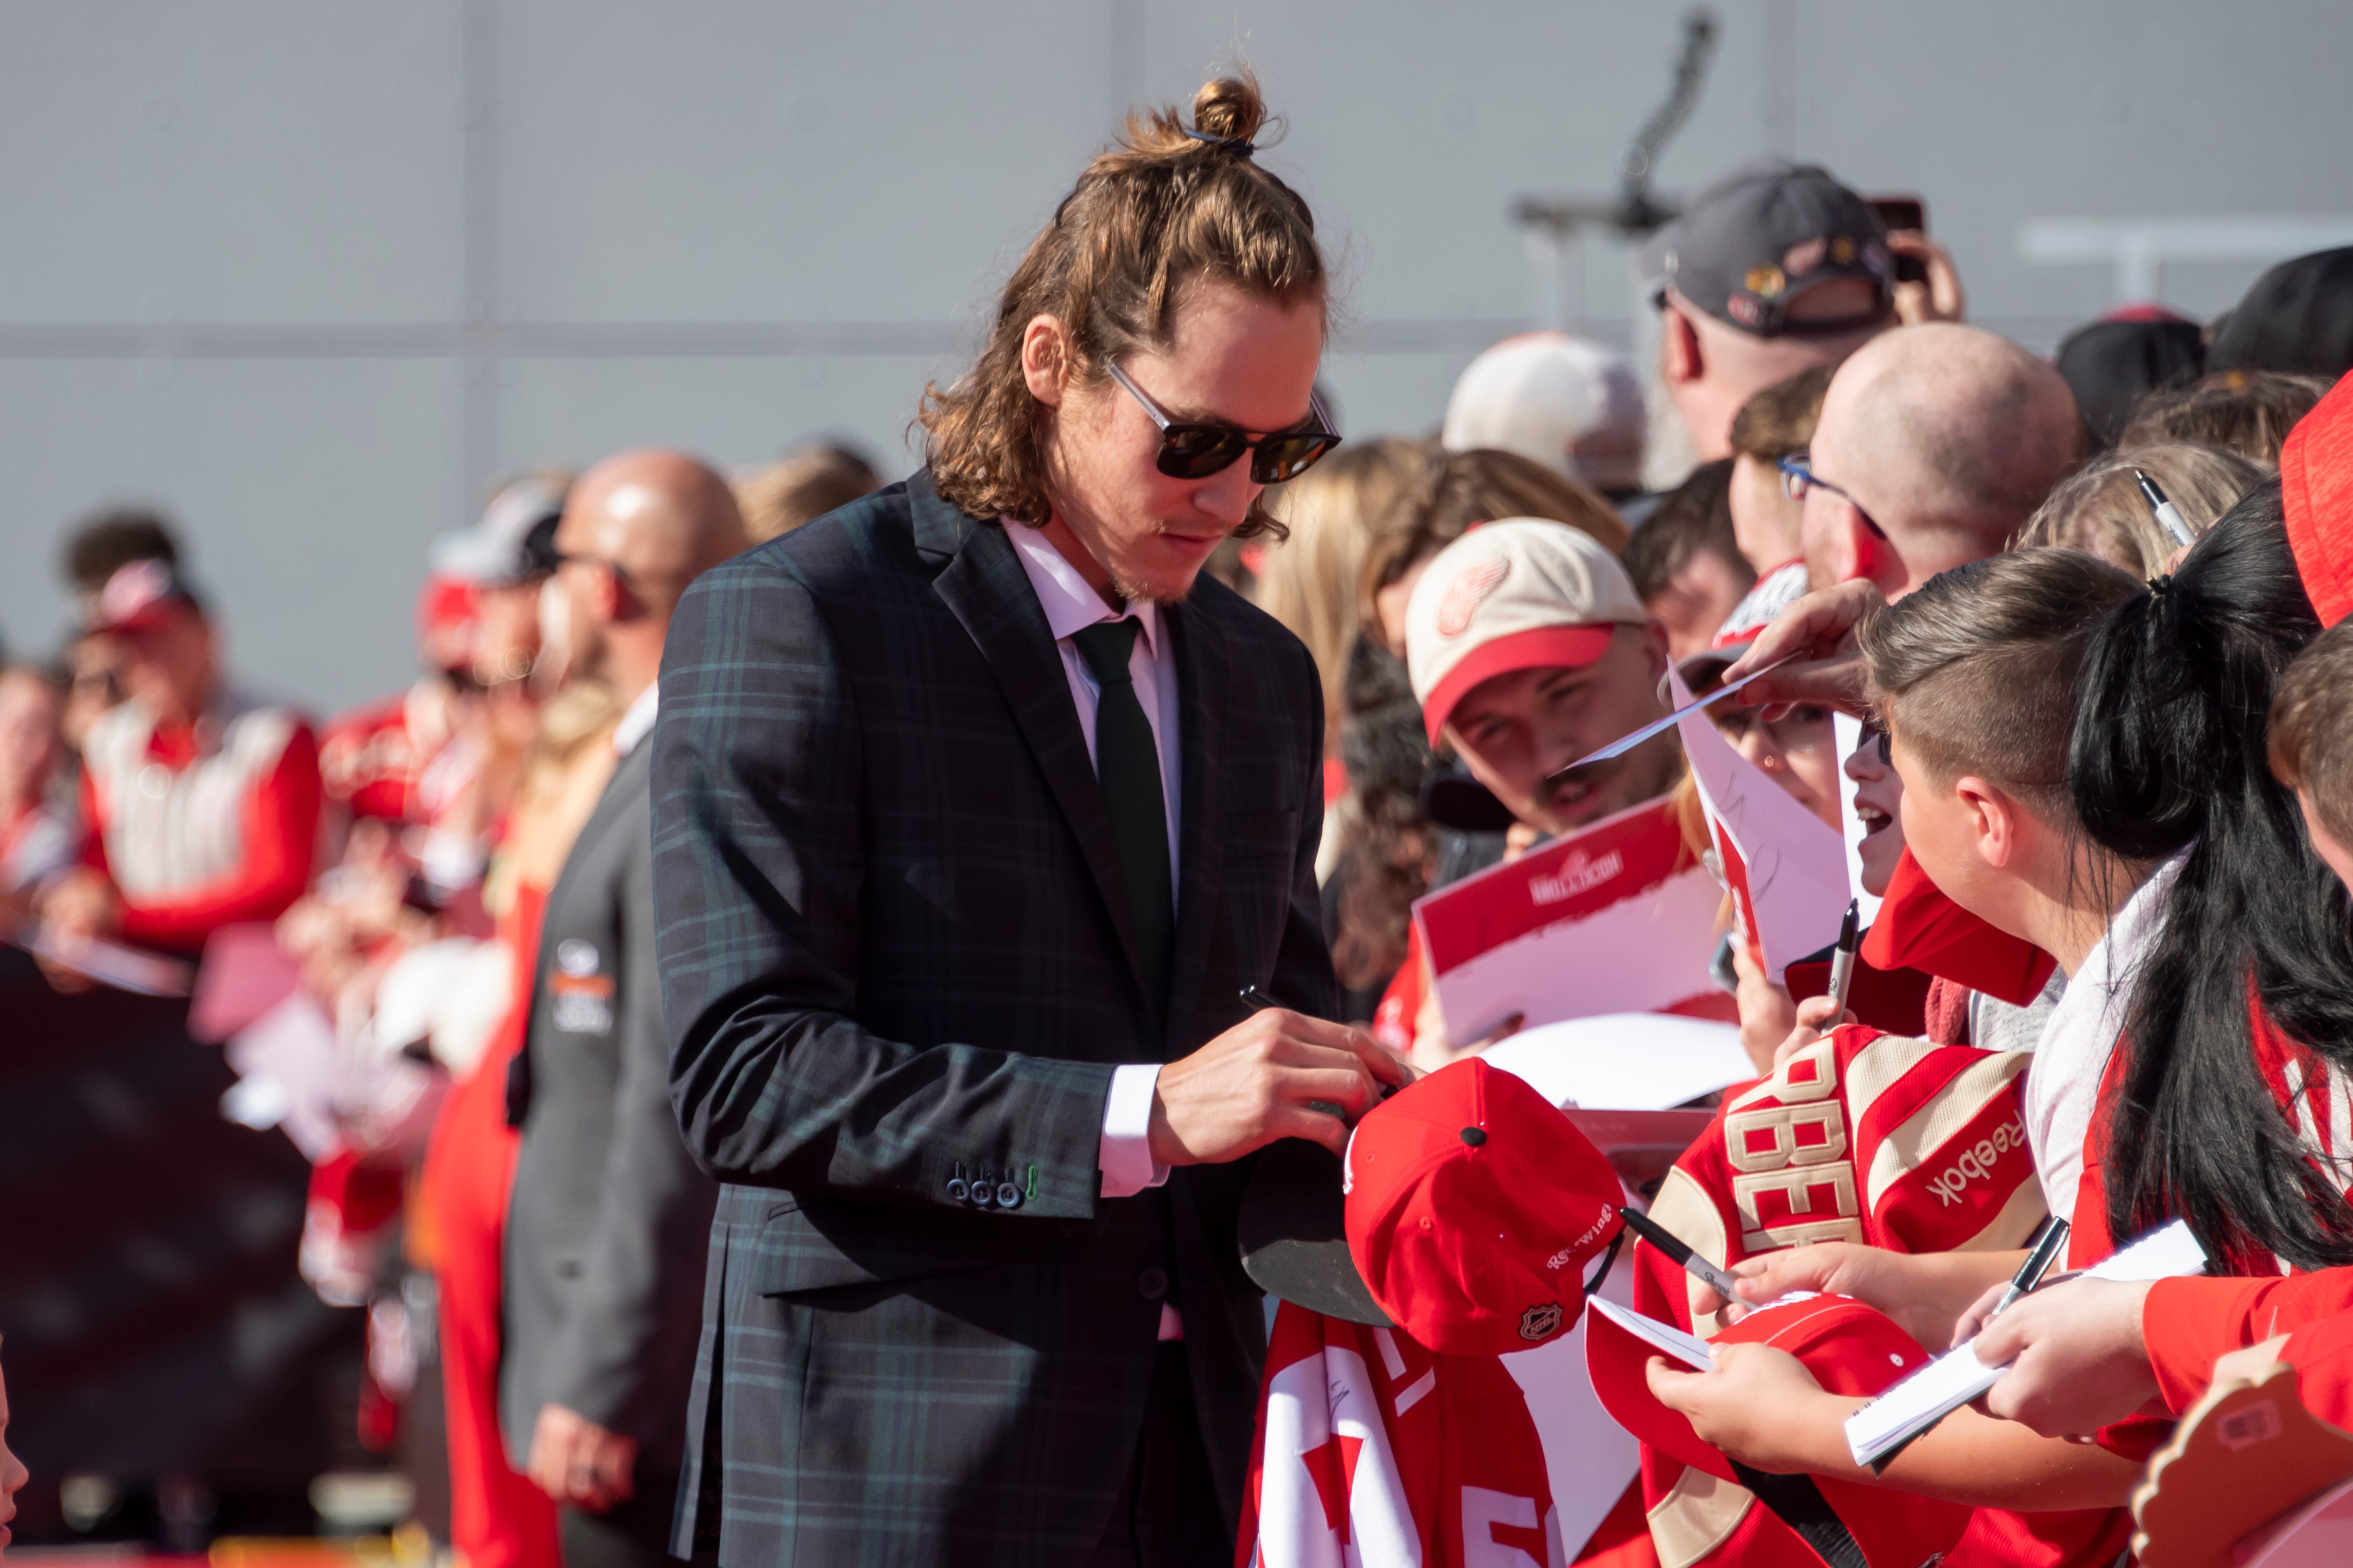 Detroit left wing Tyler Bertuzzi signs autographs while participating in a red carpet ceremony before the team's home opener against the Dallas Stars.